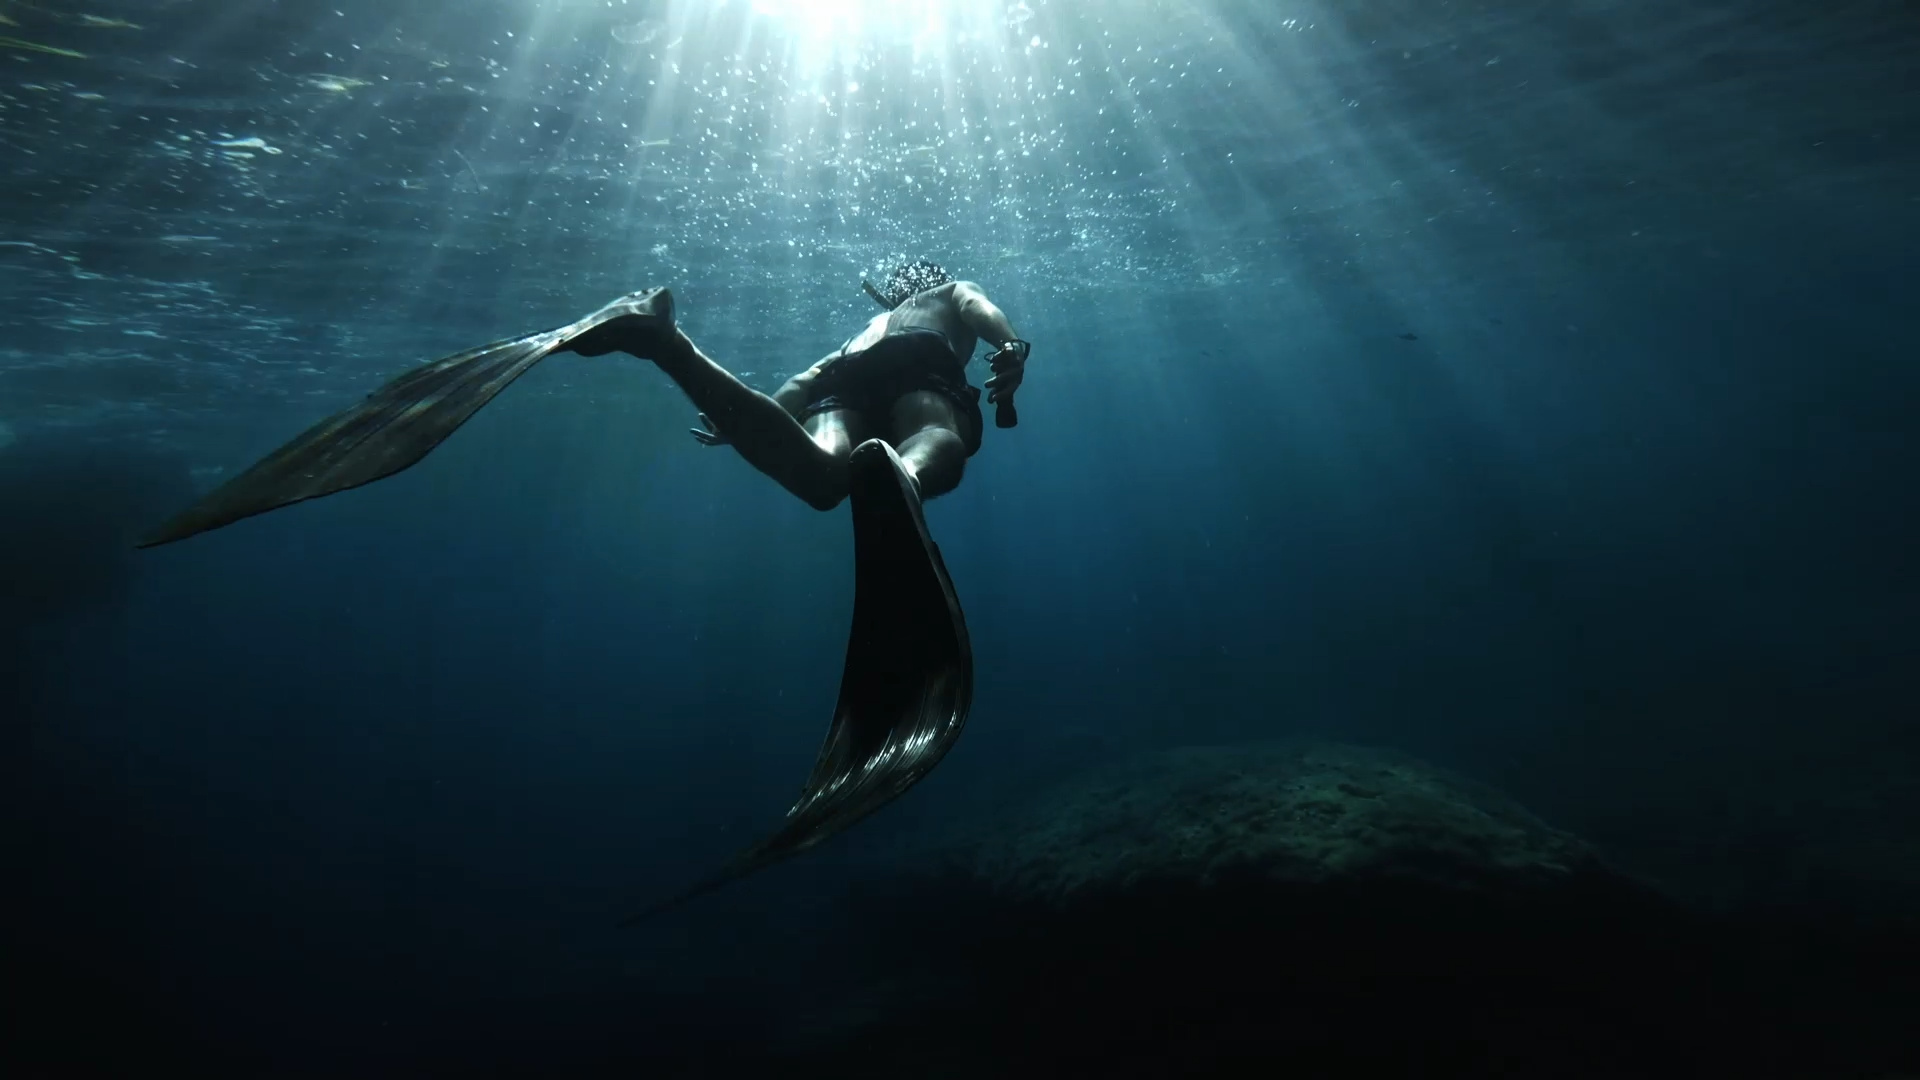 Freediving: A diver equipped with flippers explores the depths of a sea. 1920x1080 Full HD Wallpaper.